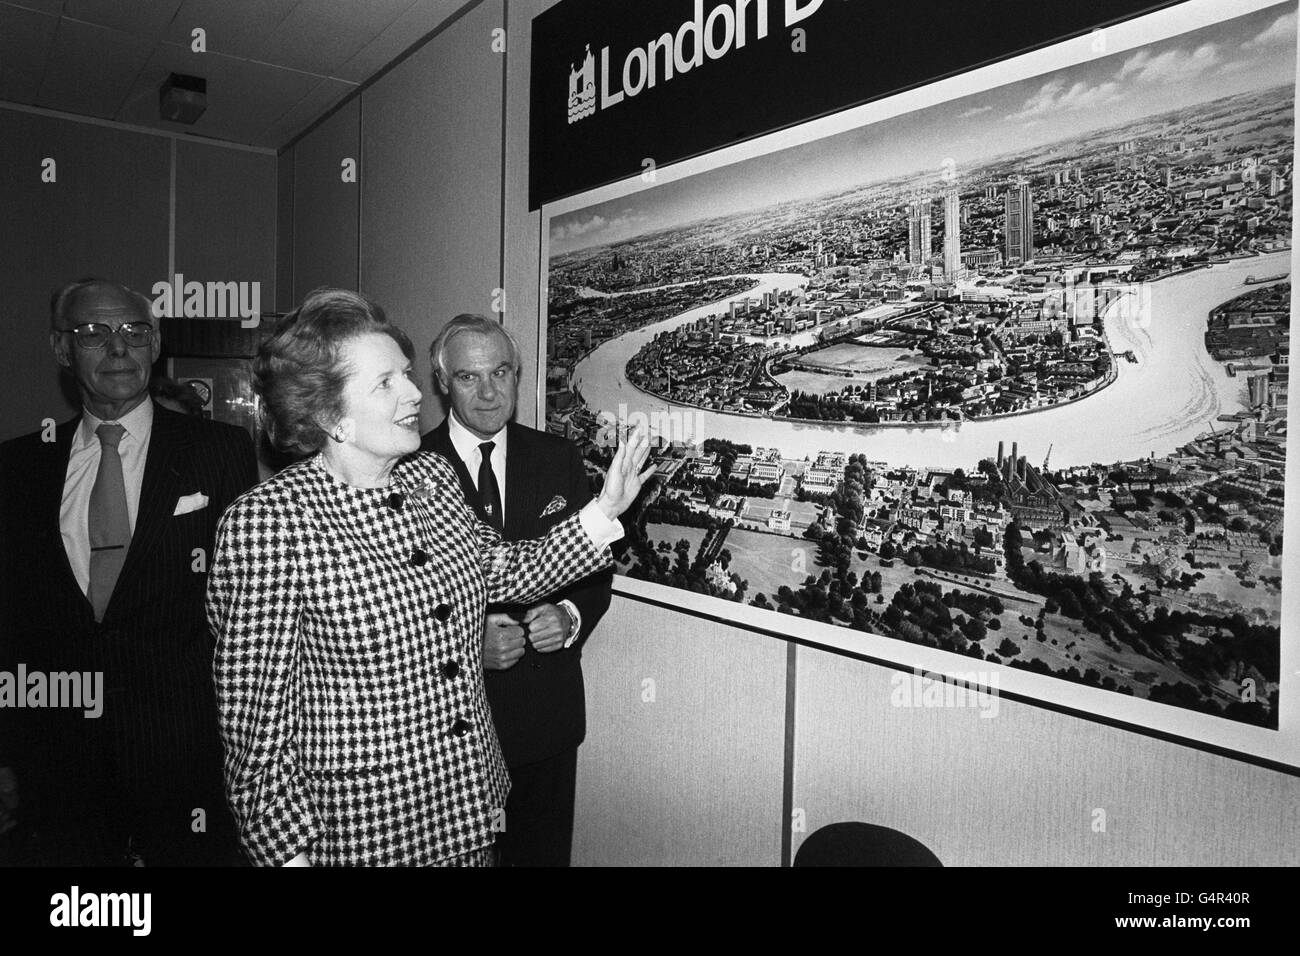 Prime Minister Margaret Thatcher discusses an artist's impression of future development in the dockland area with Chris Benson, Chairman of the London Docklands Development Corporation at it's headquarters in London. Also pictures (l) is Denis Thatcher. Stock Photo